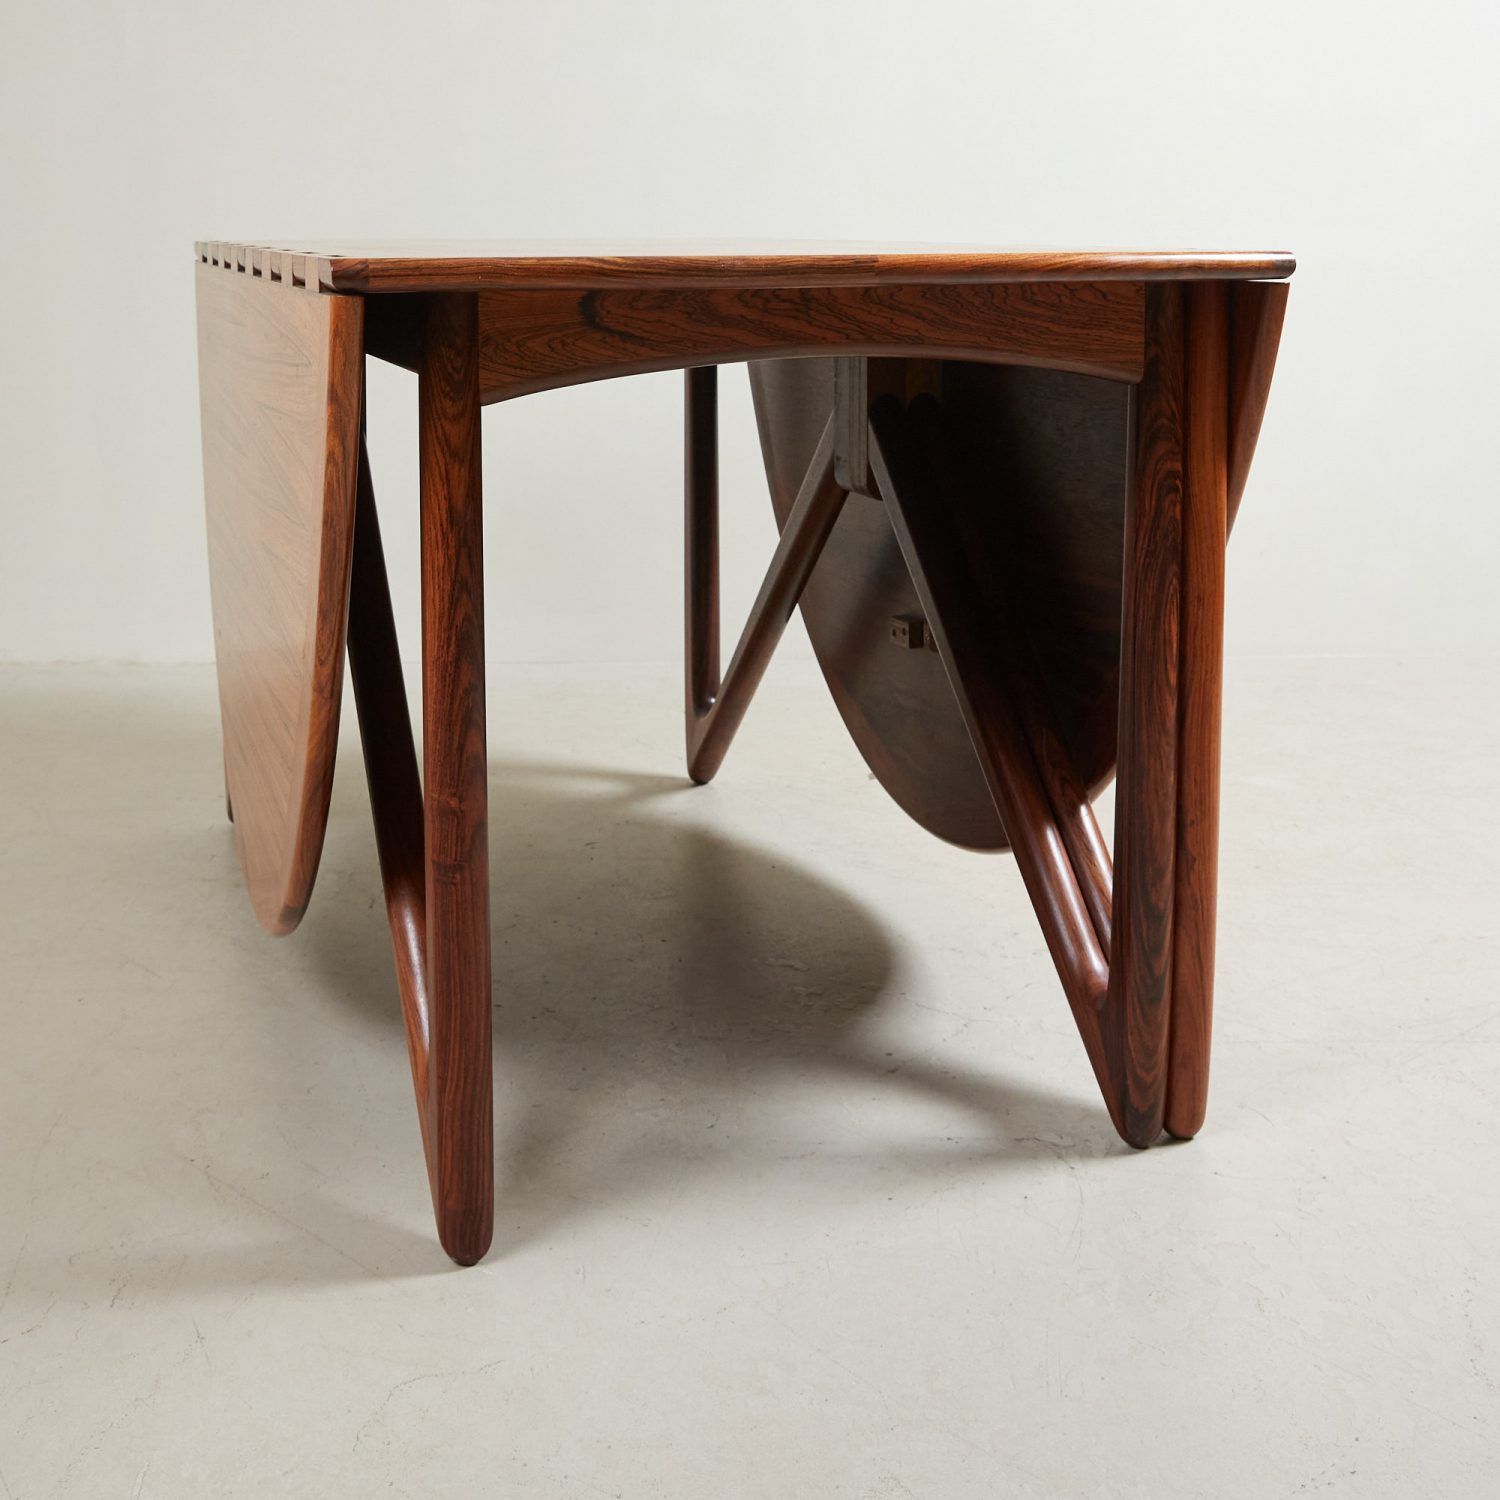 Danish Drop Leaf Tablekurt Ostervig For Jason Mobler Intended For Most Up To Date Drop Leaf Tables With Hairpin Legs (View 5 of 15)